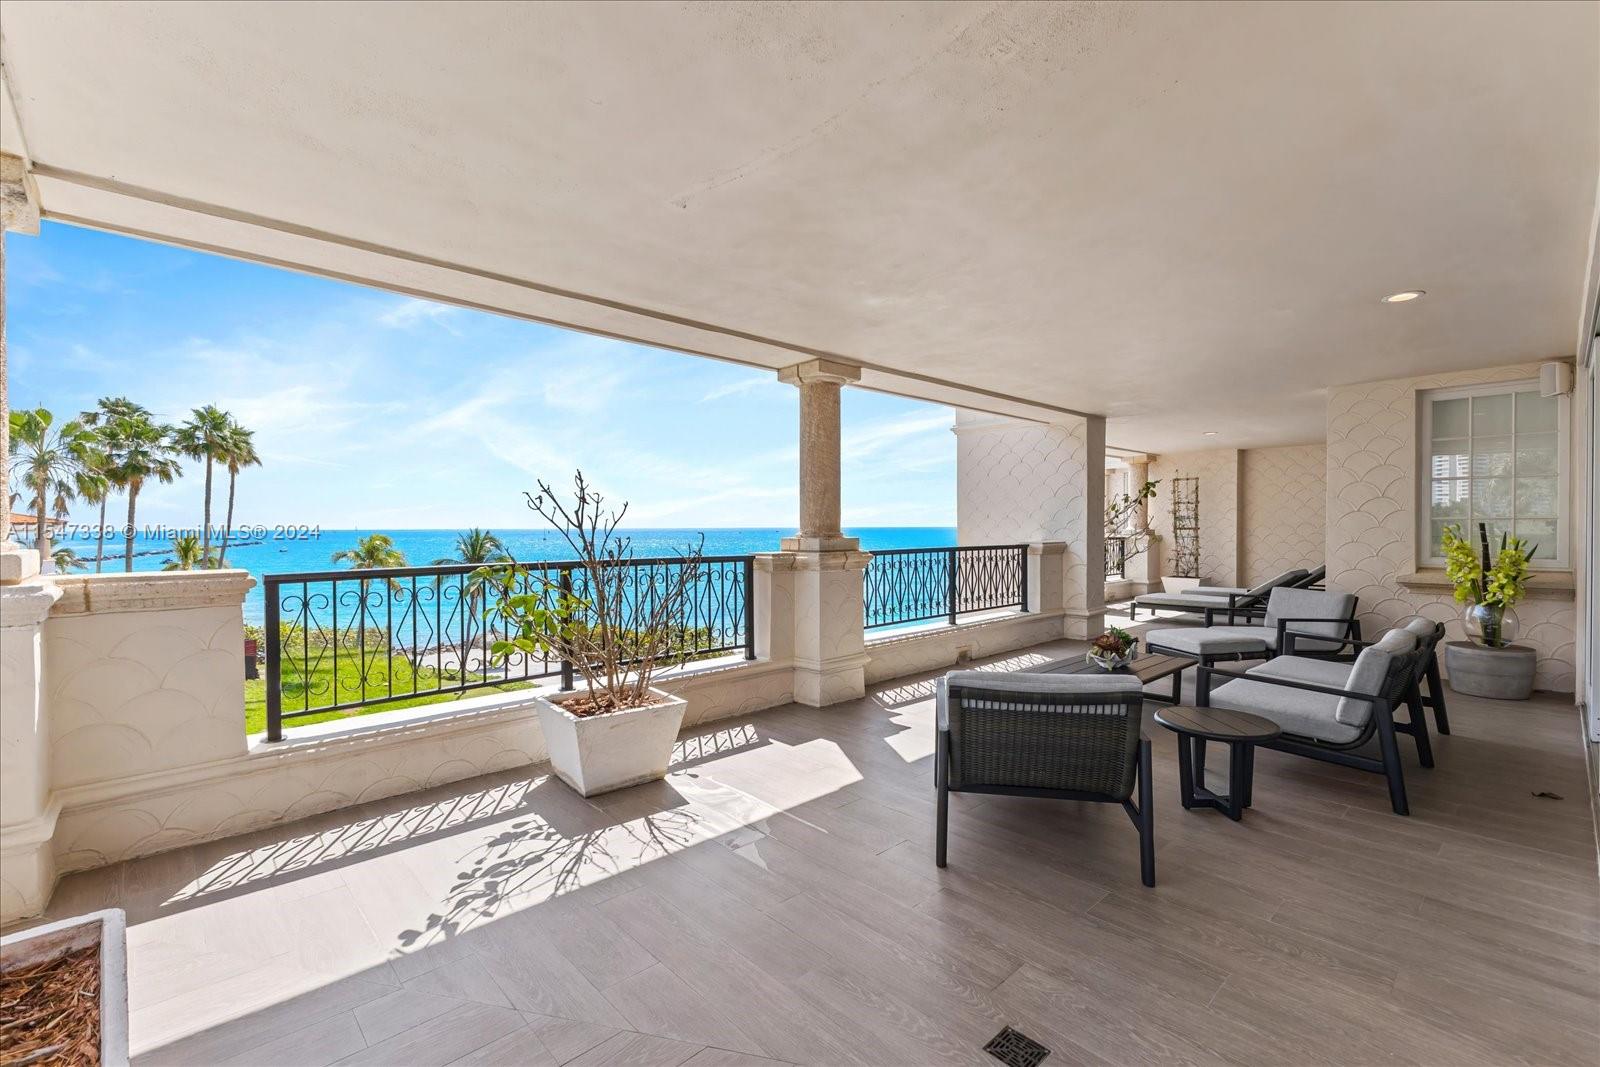 This stunning Oceanside unit on Fisher Island redefines luxury living at its finest. Completely renovated to perfection it encompasses 3,959 sq. ft. interior, 4 bedrooms, 4.5 baths, wrap-around terraces overlooking the ocean and government cut.  Professionally designed, state-of-the art kitchen, marmoglass and wood floors thought-out, impact glass doors,  and more features. Live the Fisher Island lifestyle in this exceptional unit!